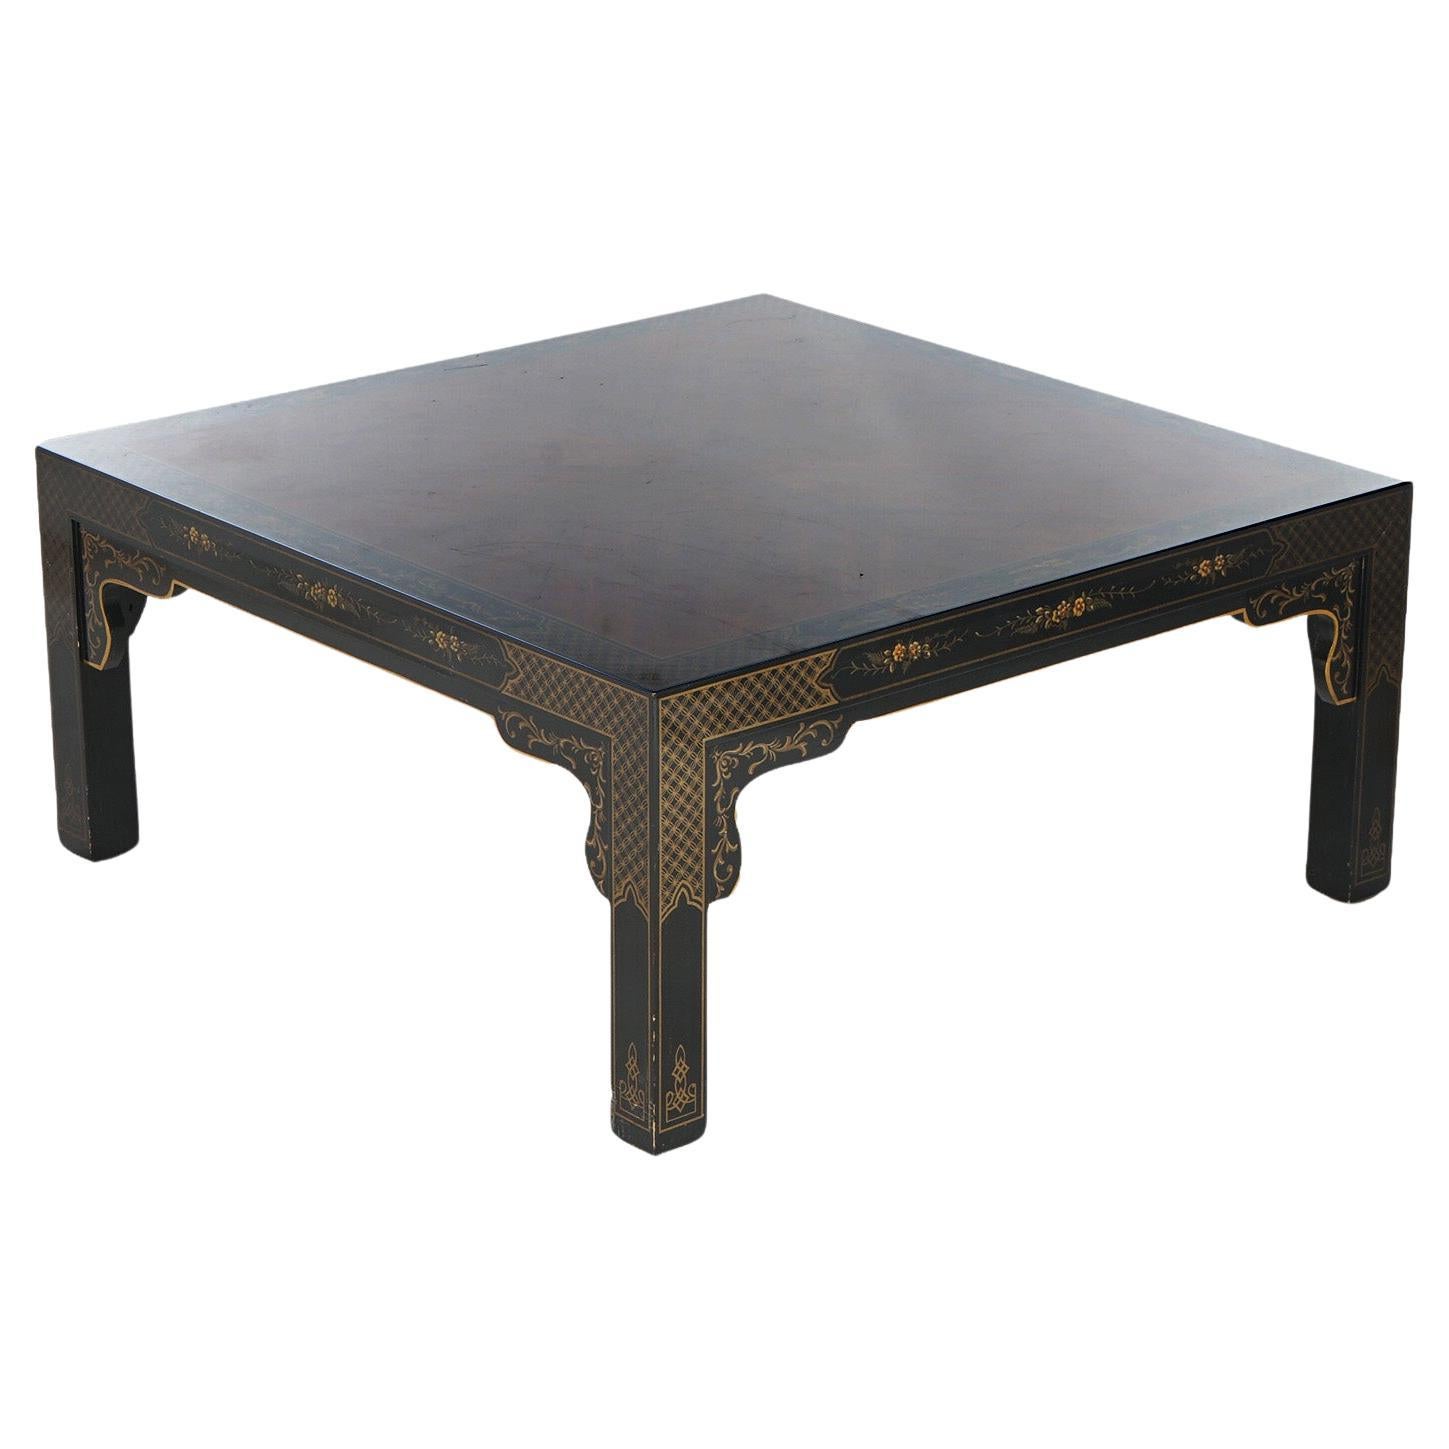  Drexel Heritage Mahogany And Ebonized Chinoiserie Decorated Low Table C1950 For Sale